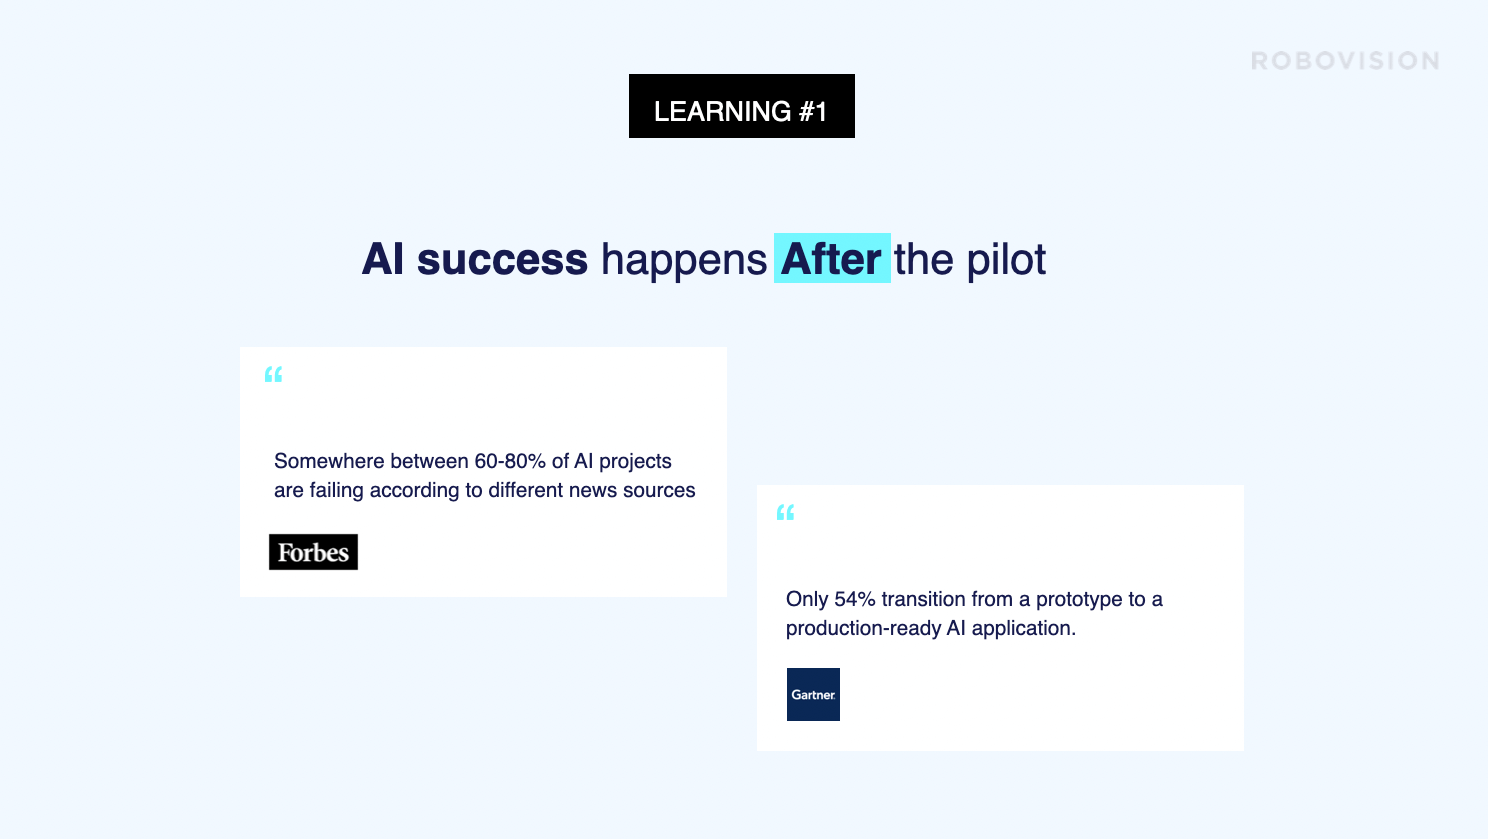 AI success happens after the pilot. "Somewhere between 60-80% of AI projects are failing according to different news sources" – Forbes. "Only 54% transition from a prototype to a production-ready AI application." –Gartner.